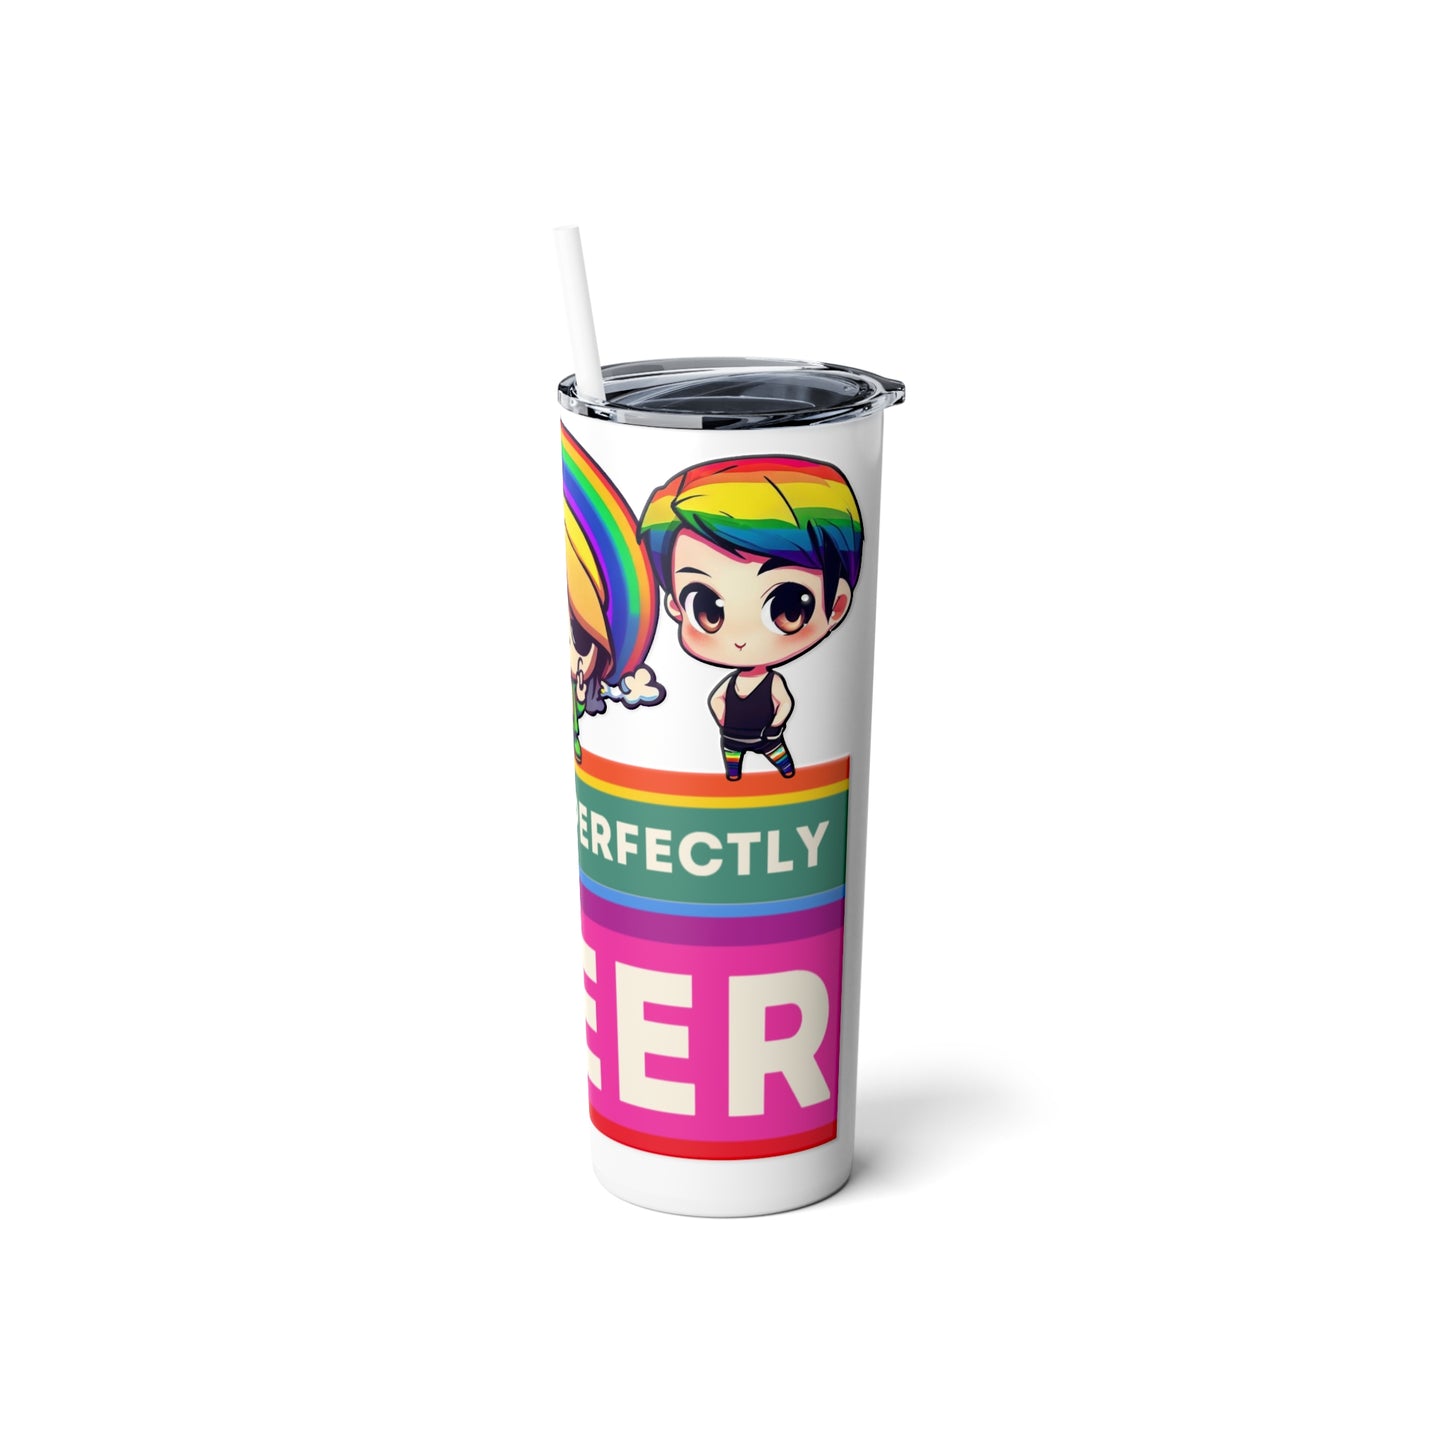 Skinny Steel Tumbler with Straw, 20oz, Let Me Be Perfectly Queer, Chibi